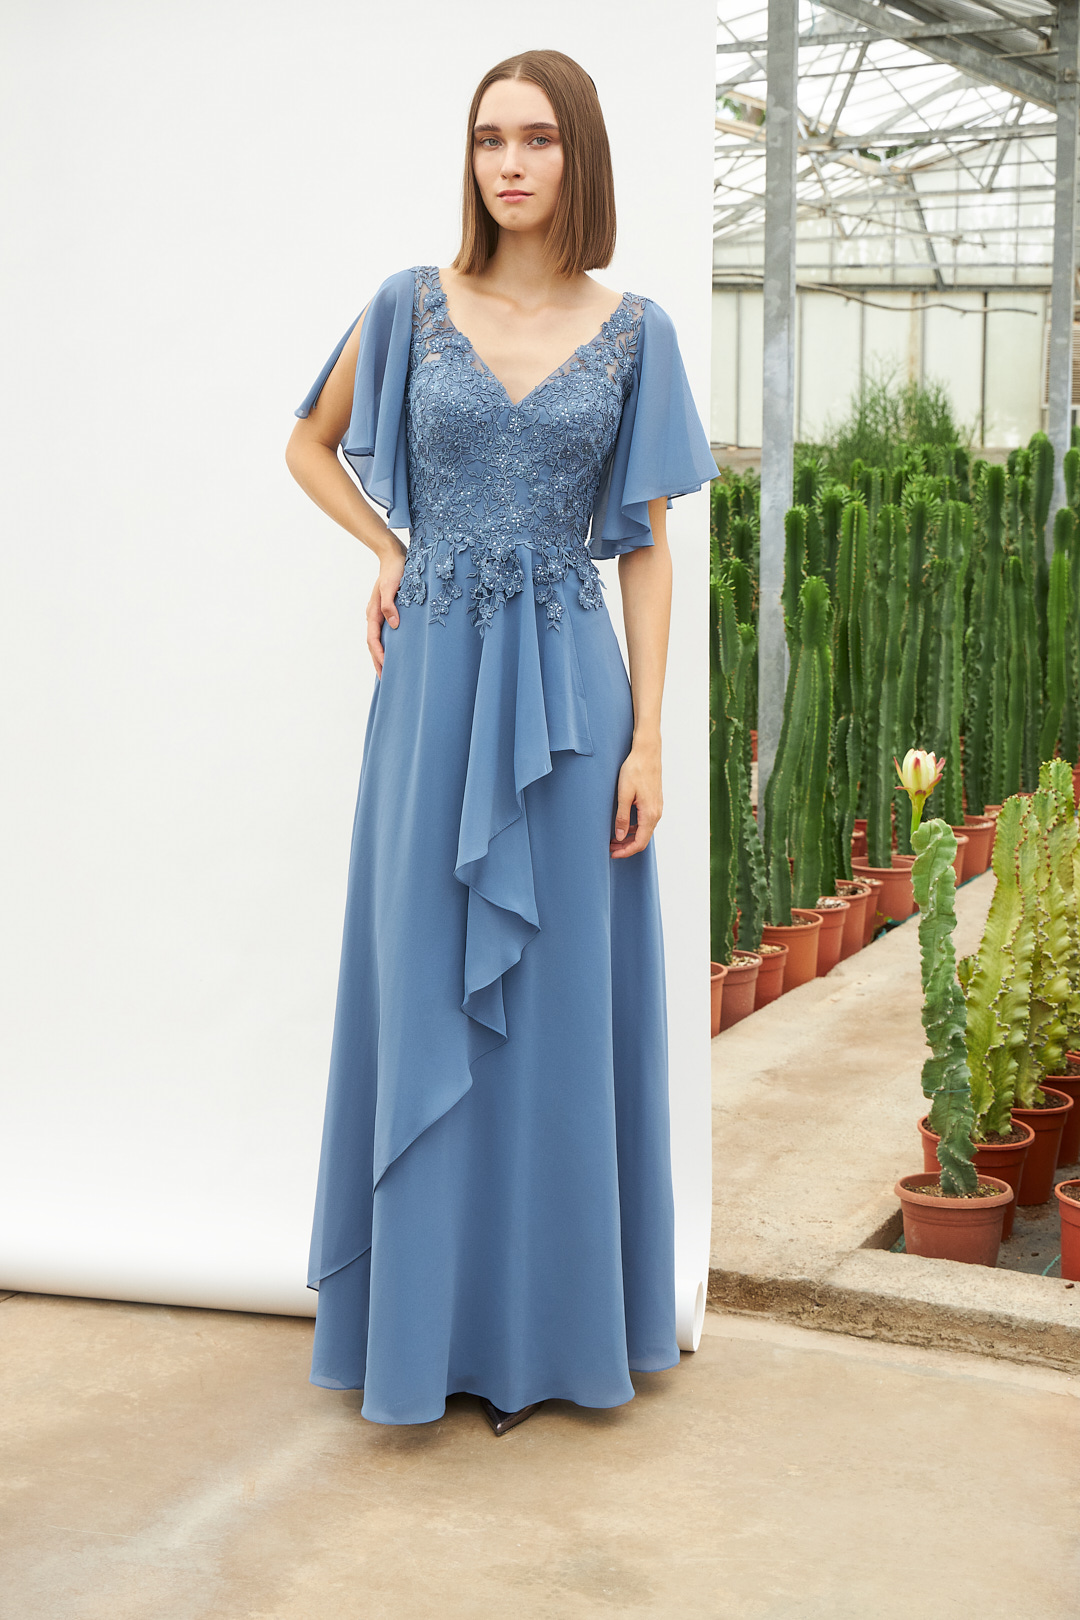 Классические платья / Long classic chiffon dress with lace and beaded top and short sleeves